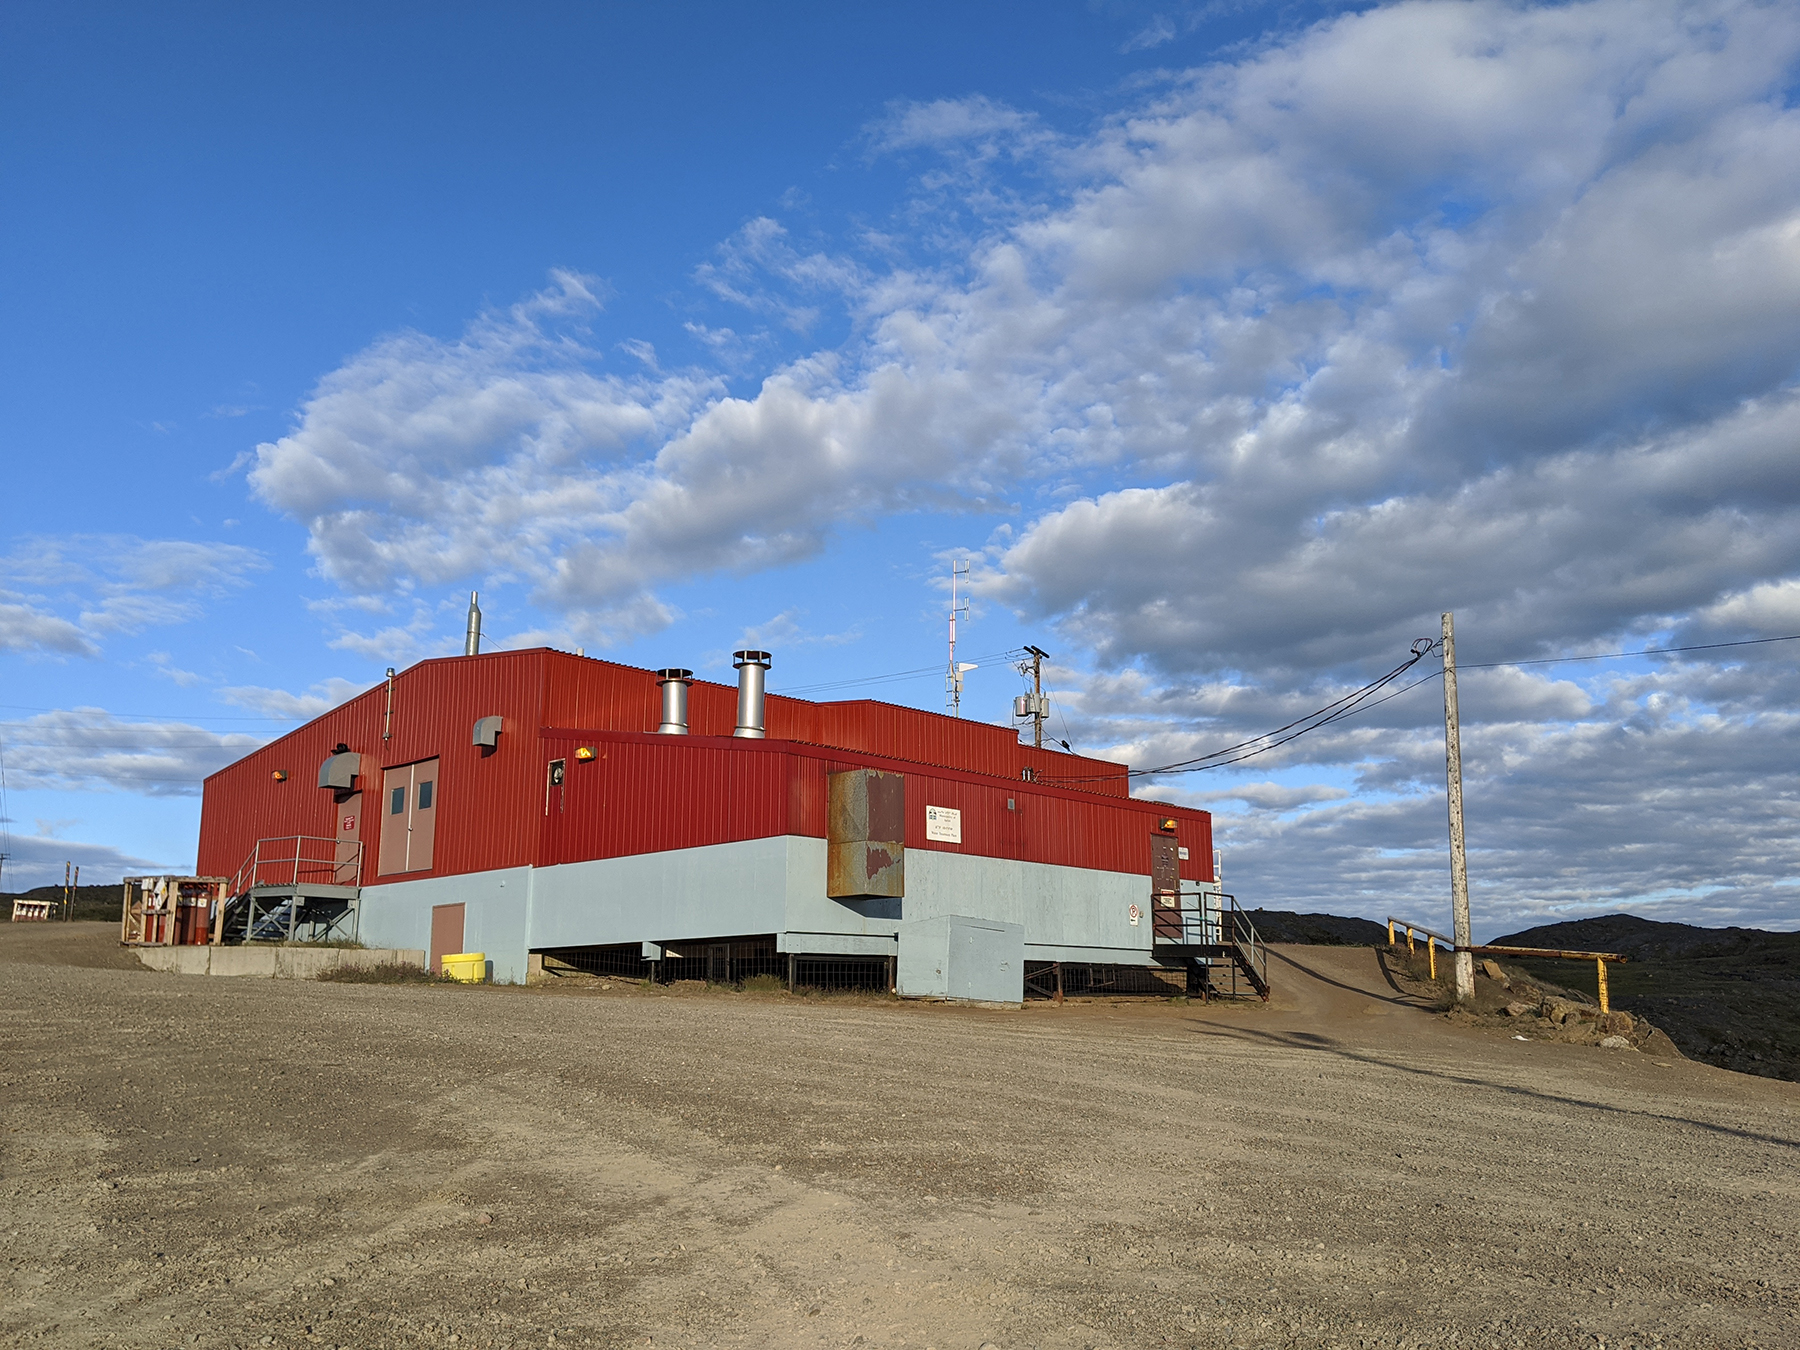 Iqaluit’s 62-year-old water treatment plant. (Image courtesy of WSP Canada Inc.)